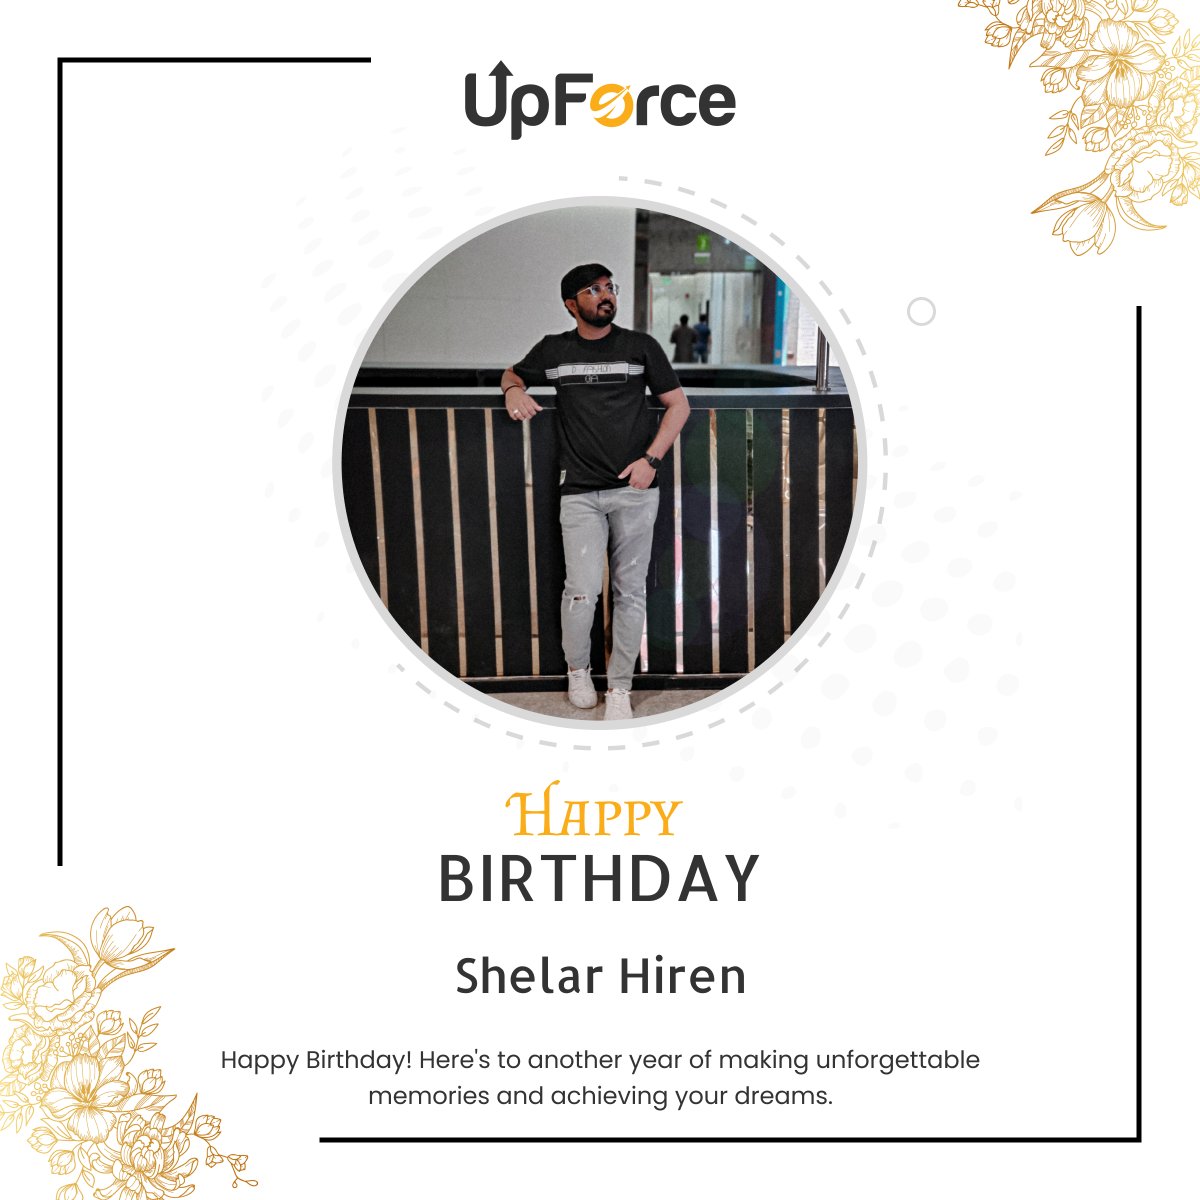 '🎉 Wishing a very Happy Birthday to our invaluable team member at UpforceTech! 🎂 Your dedication and hard work light up our workplace every day. Here's to another year of success, growth, and wonderful memories together! 🎈 #HappyBirthday #TeamUpforceTech'